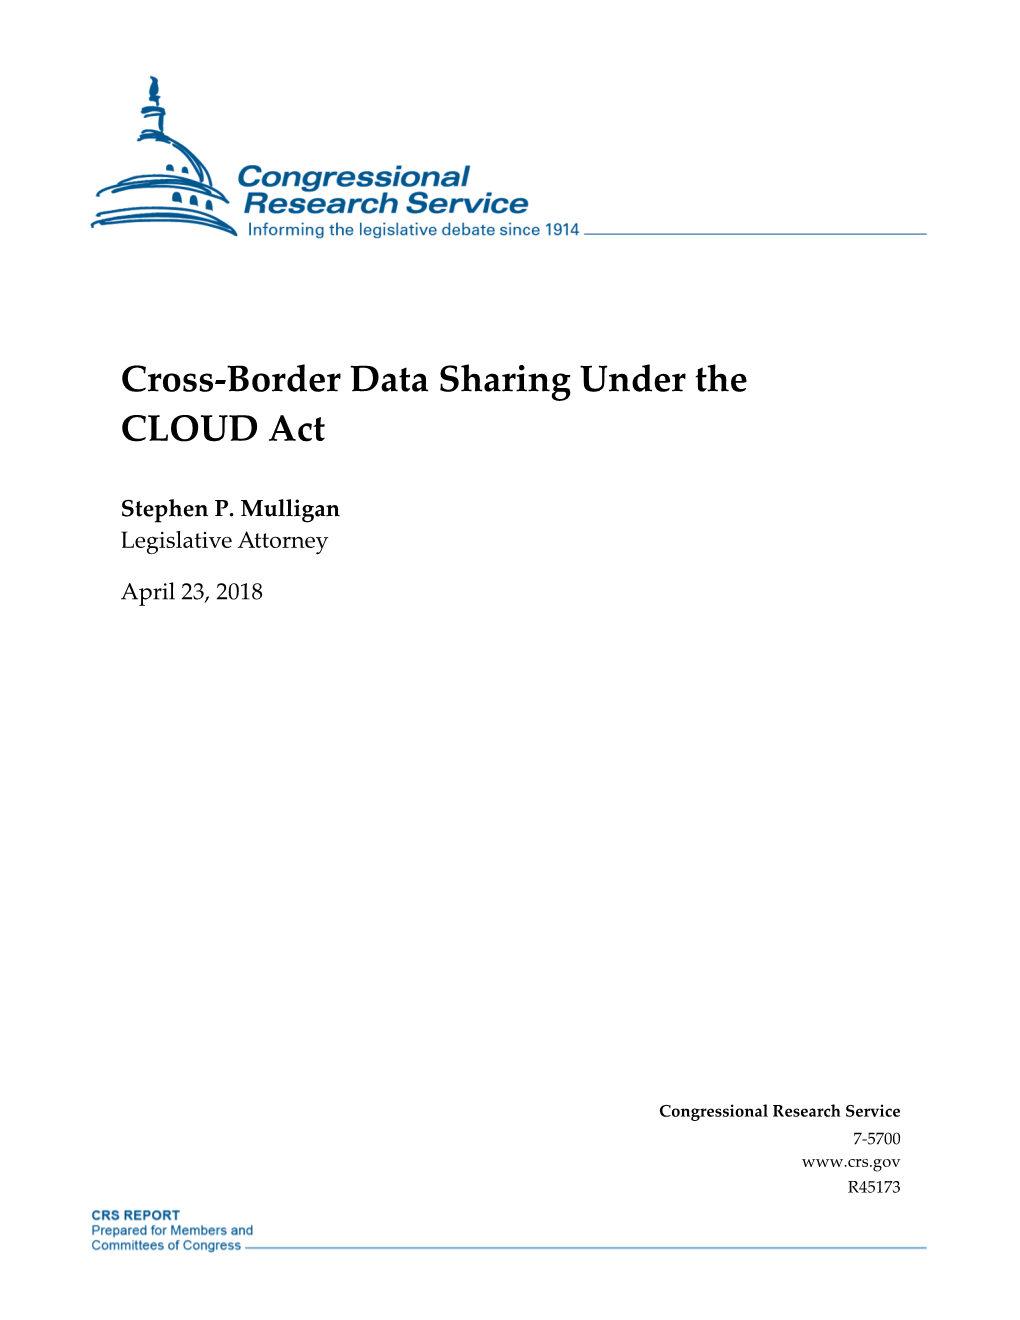 Cross-Border Data Sharing Under the CLOUD Act